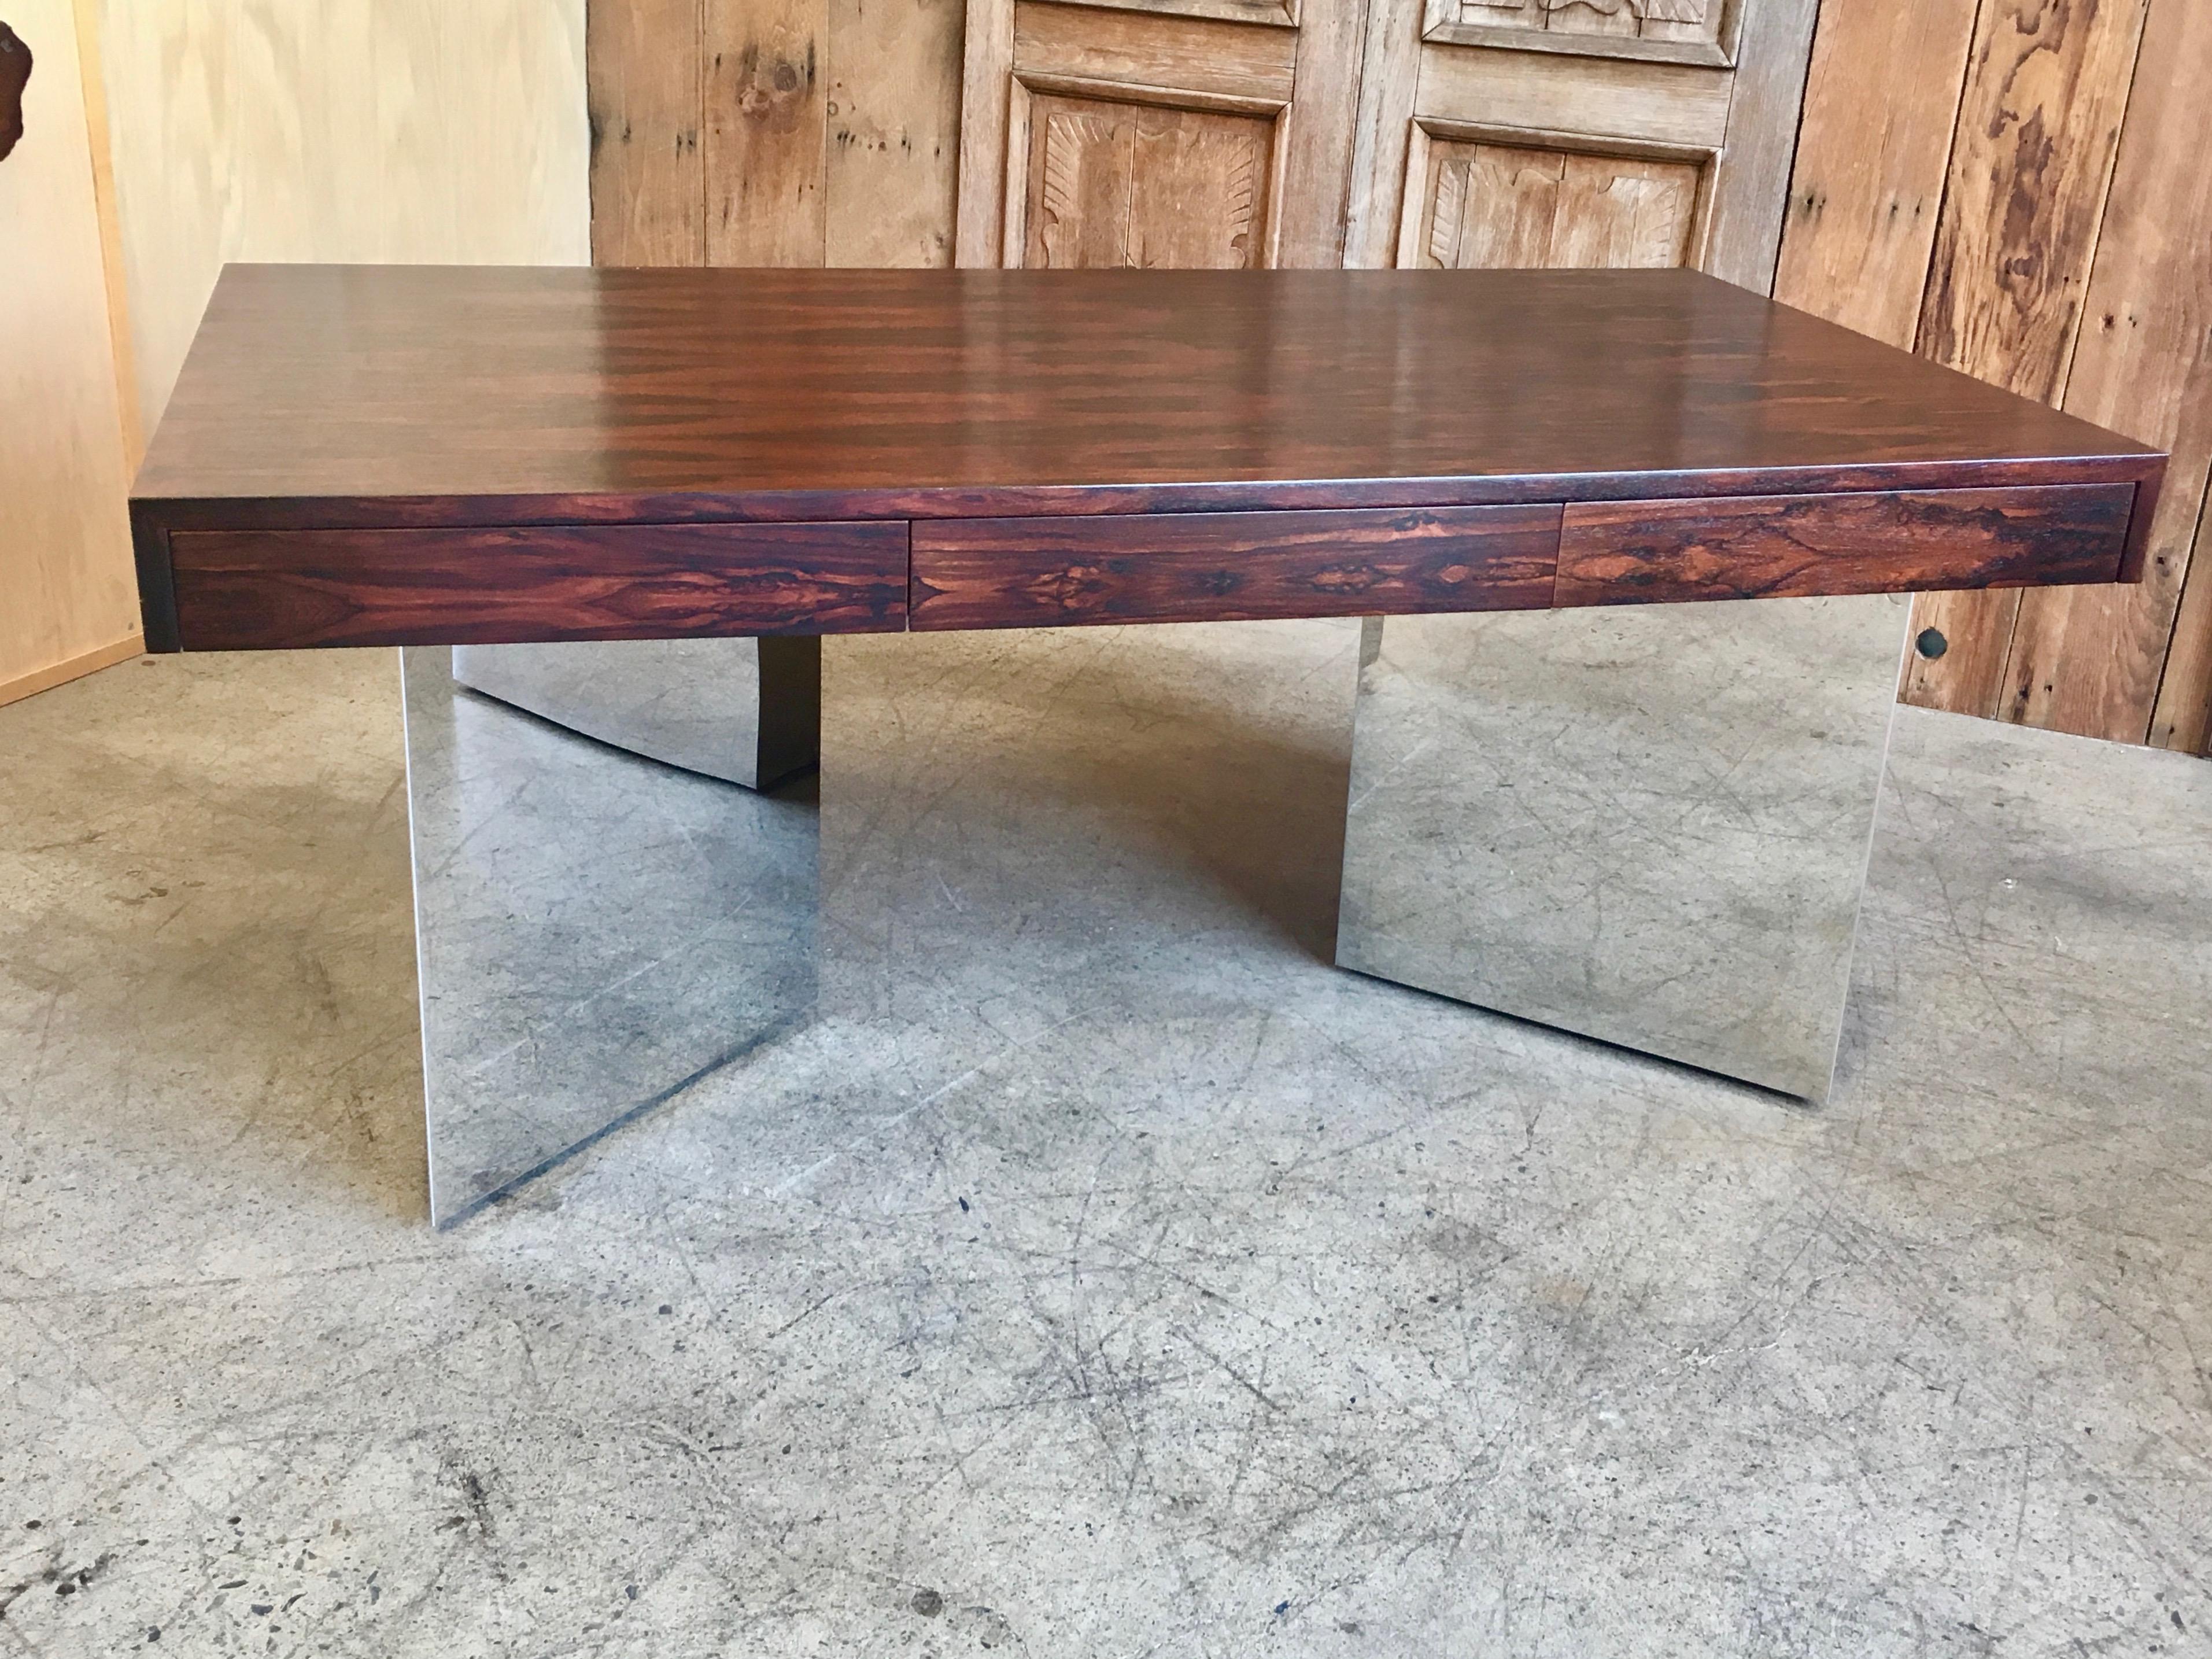 Rosewood and mirror polished stainless steel executive desk by Pace collection. Highly figured rosewood grain to the top. This piece has been professionally restored.